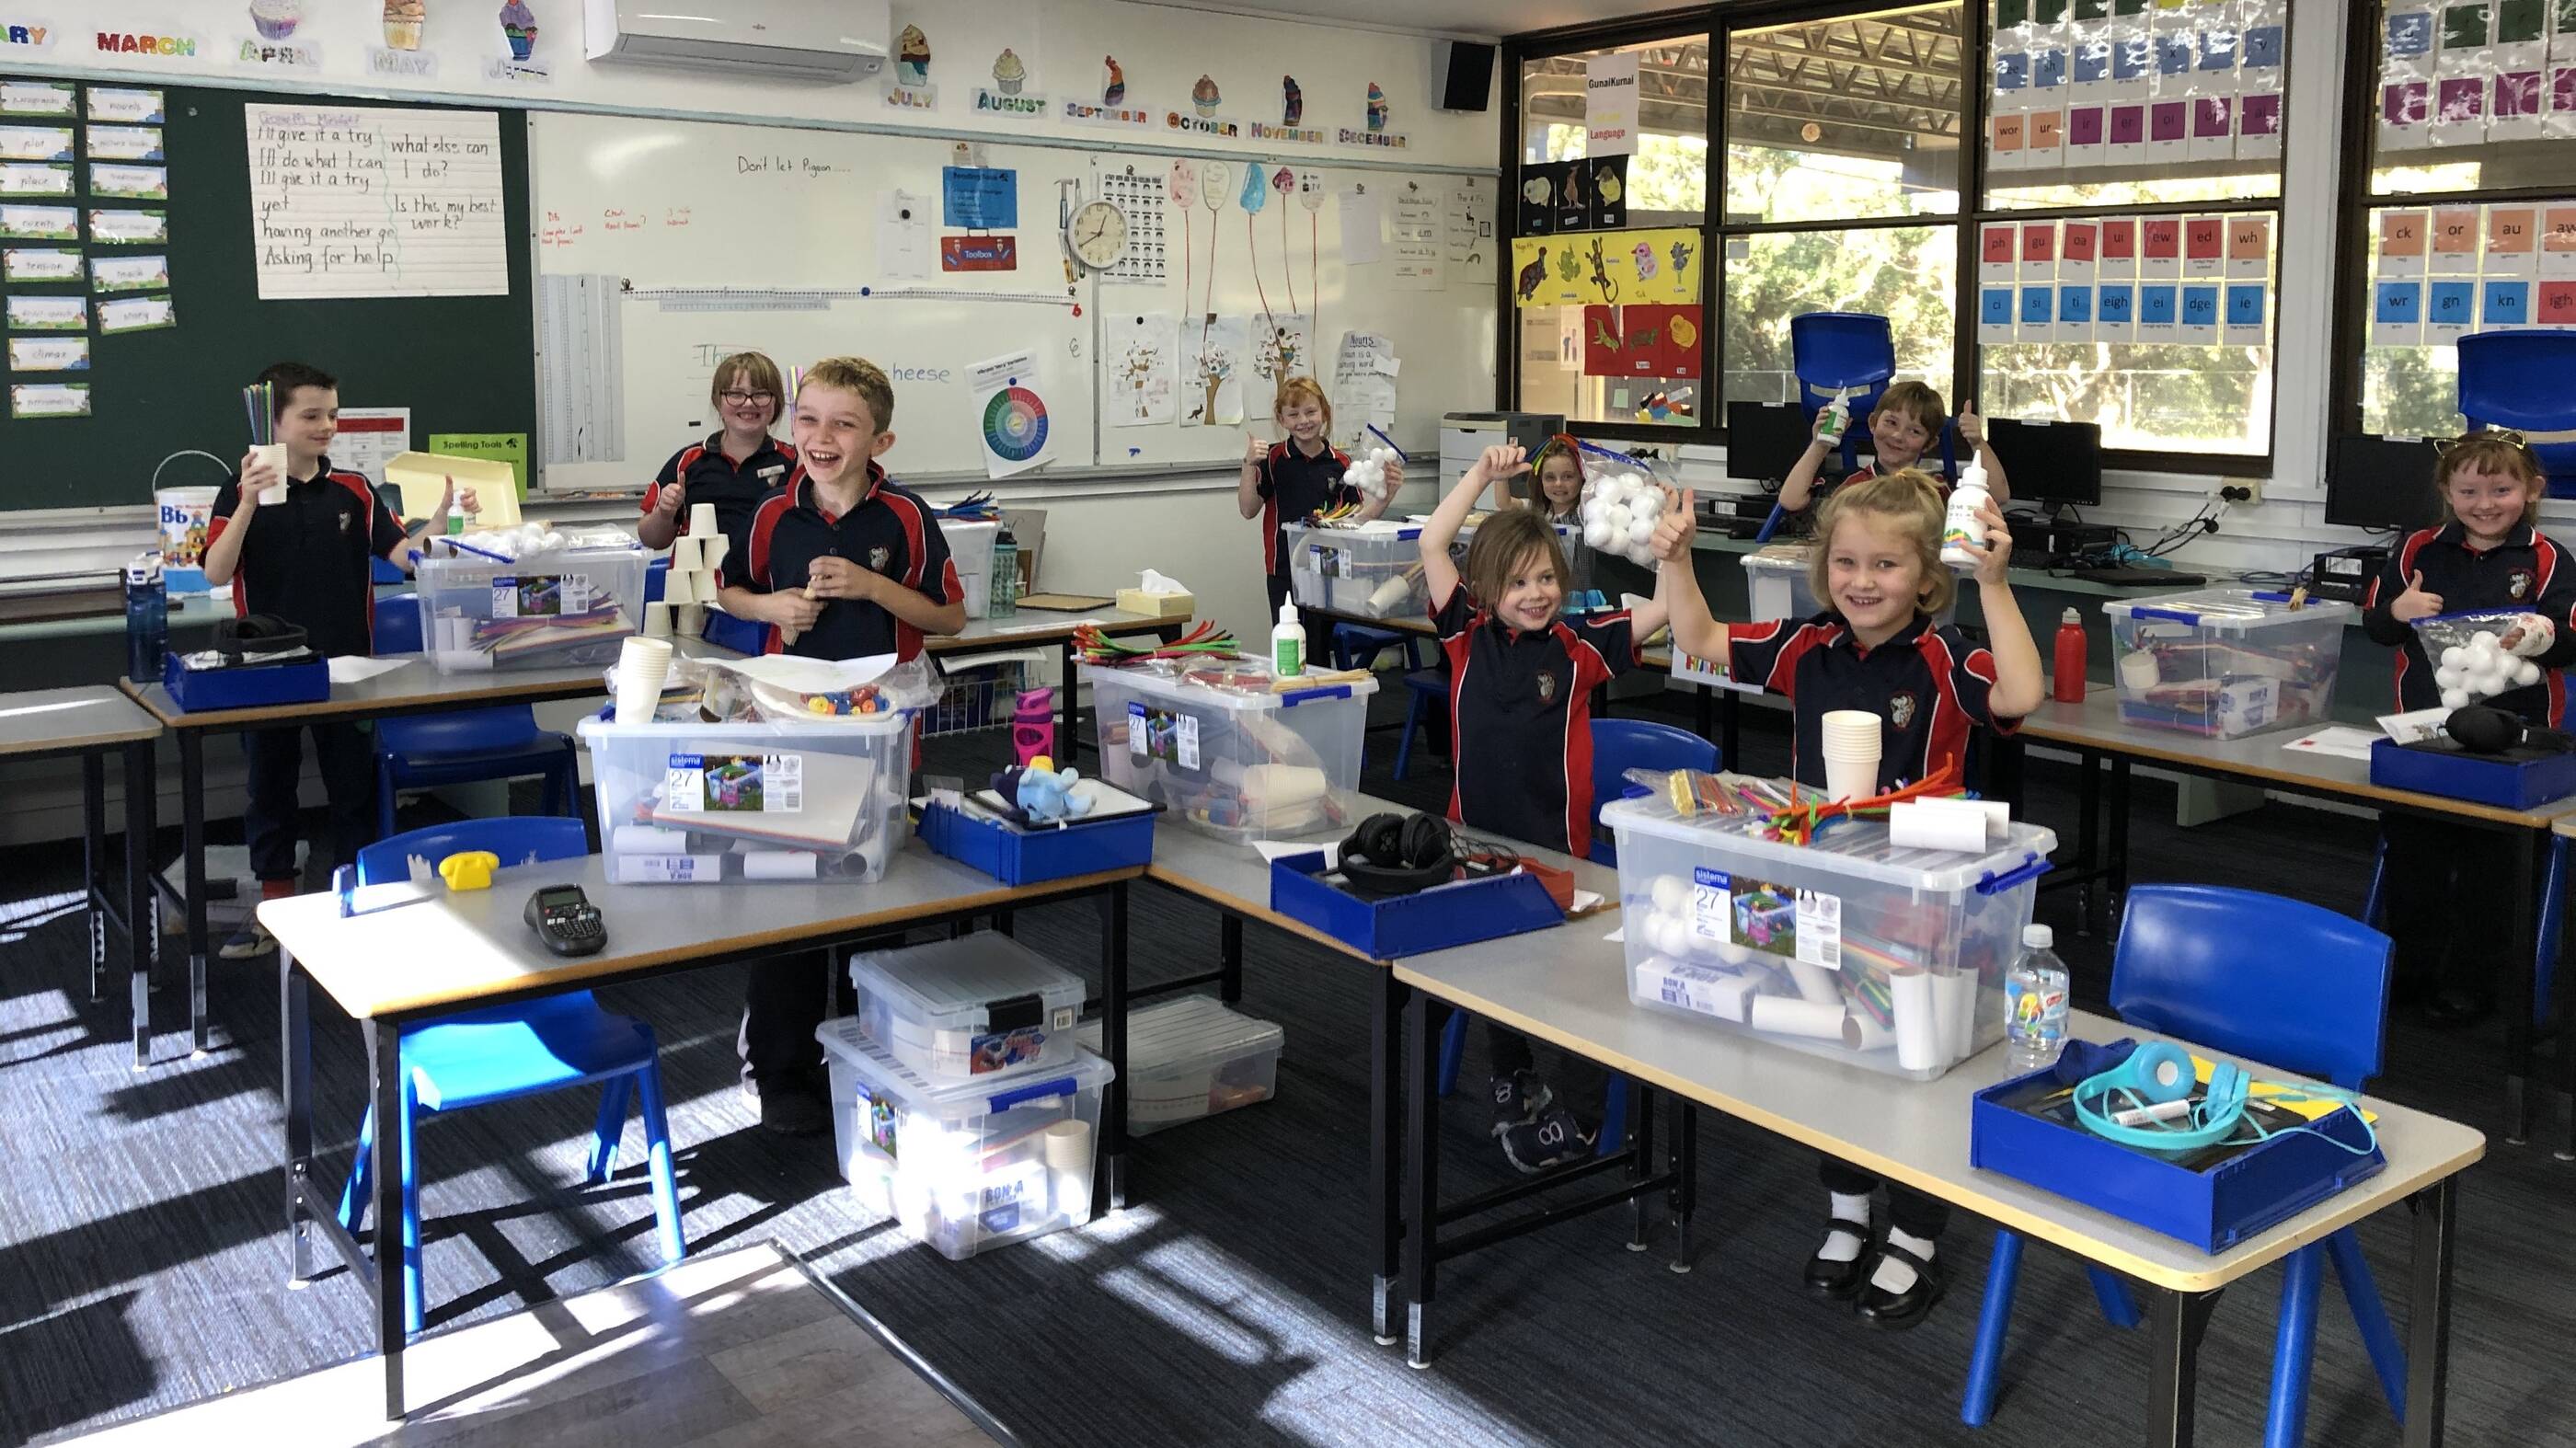 Image Students at Loch Sport Primary School love their new STEM resources funded by an Esso Bright Future Grant.